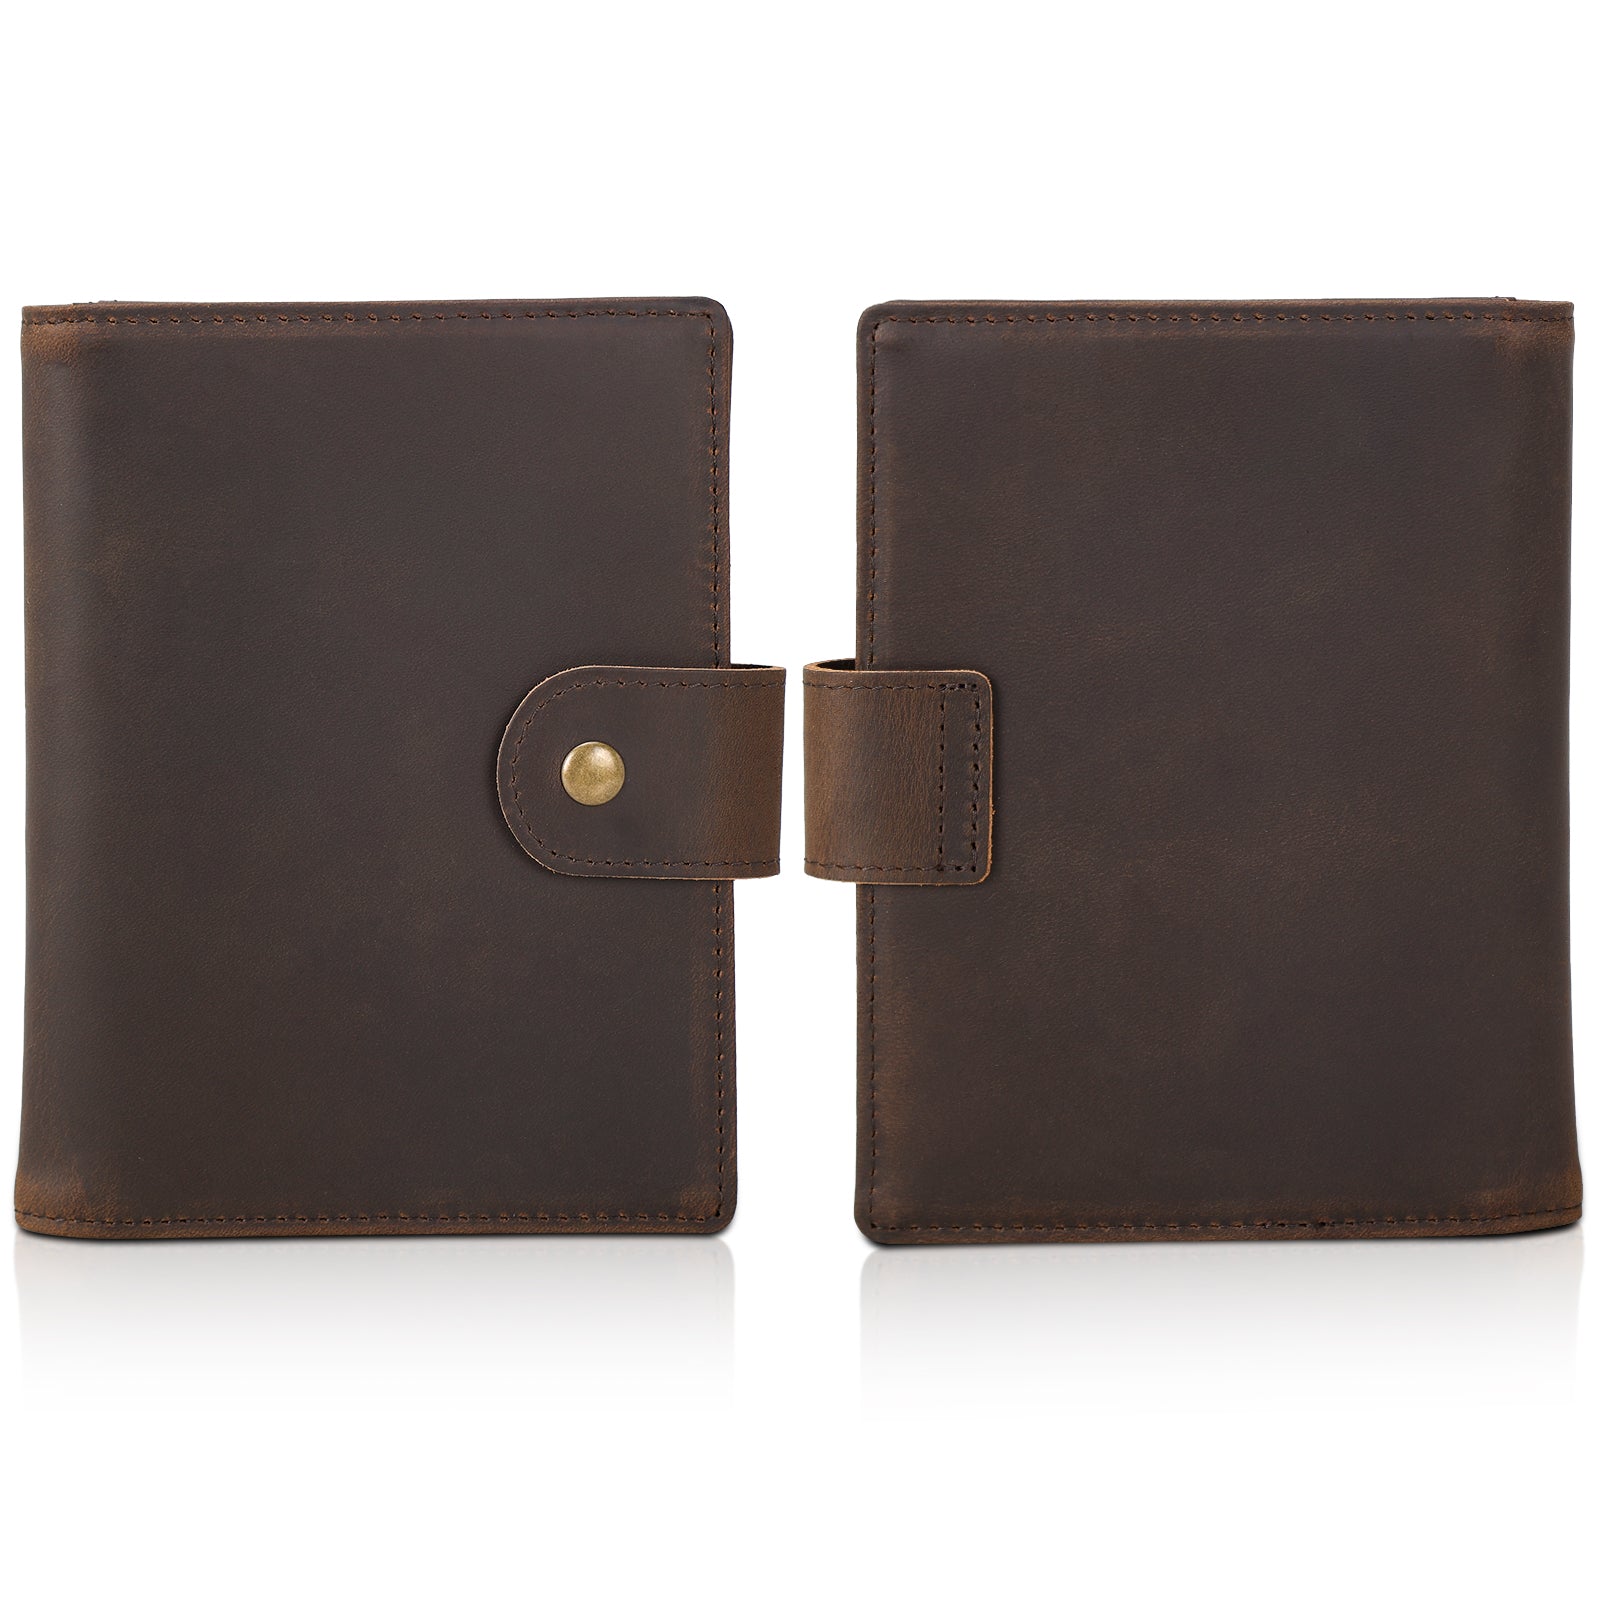 Full Grain Leather Snap Passport and Vaccine Card Holder (Front/Back)